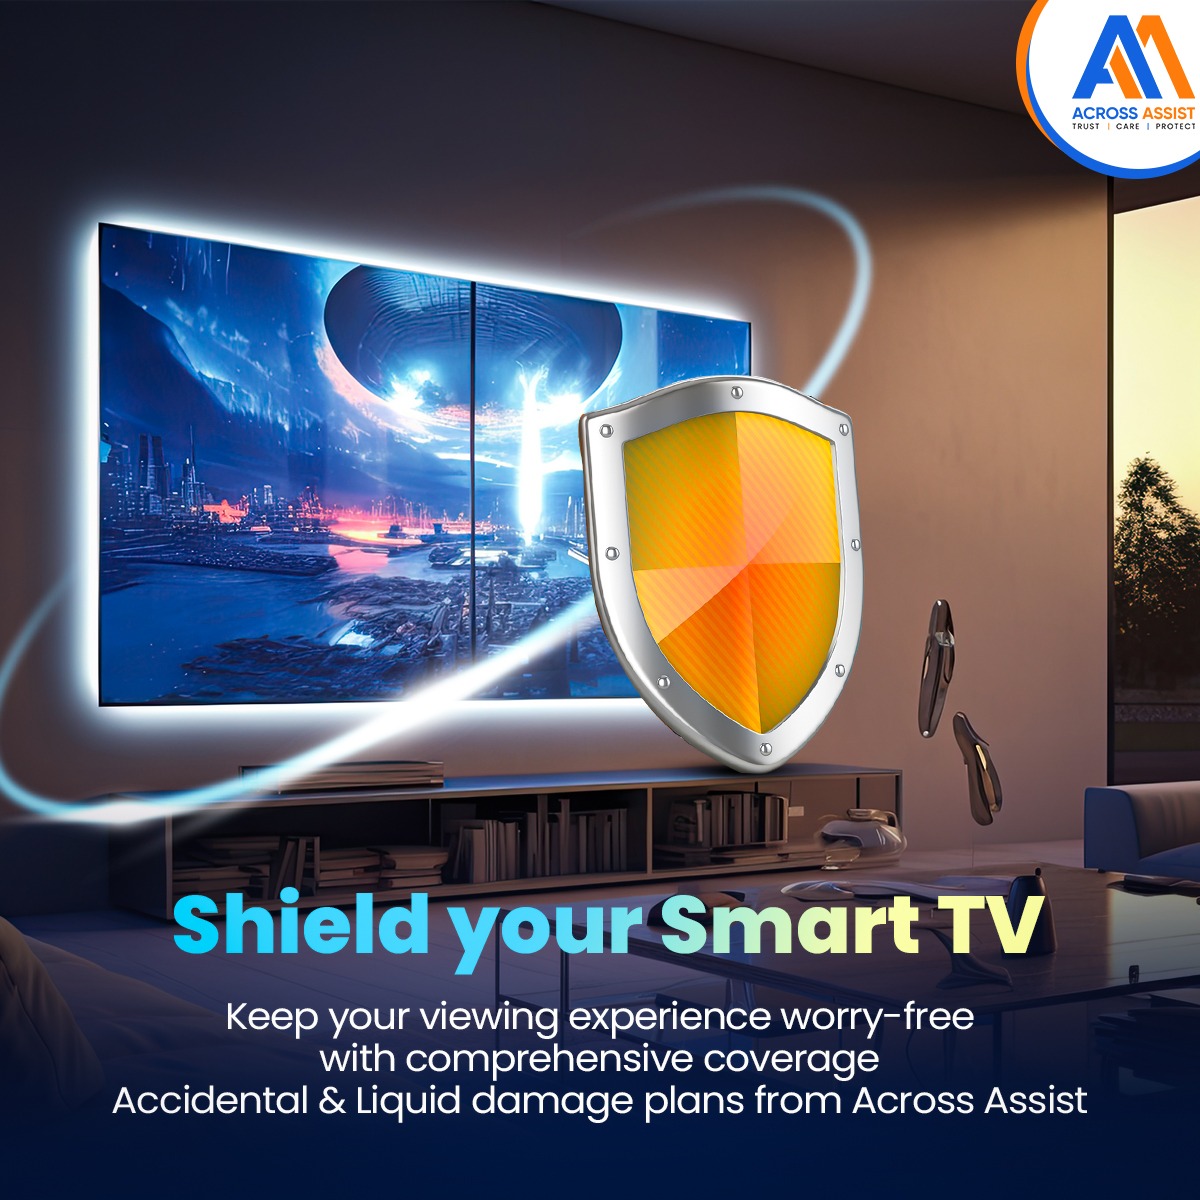 Safeguard your Smart TV from Accidental & Liquid damage with Across Assist's device protection plans. Enjoy uninterrupted entertainment with complete peace of mind.

#AcrossAssist #ADLD #ExtendedWarranty #DeviceInsurance #TVRepair #Insurance #MobileInsurance #DeviceInsurance